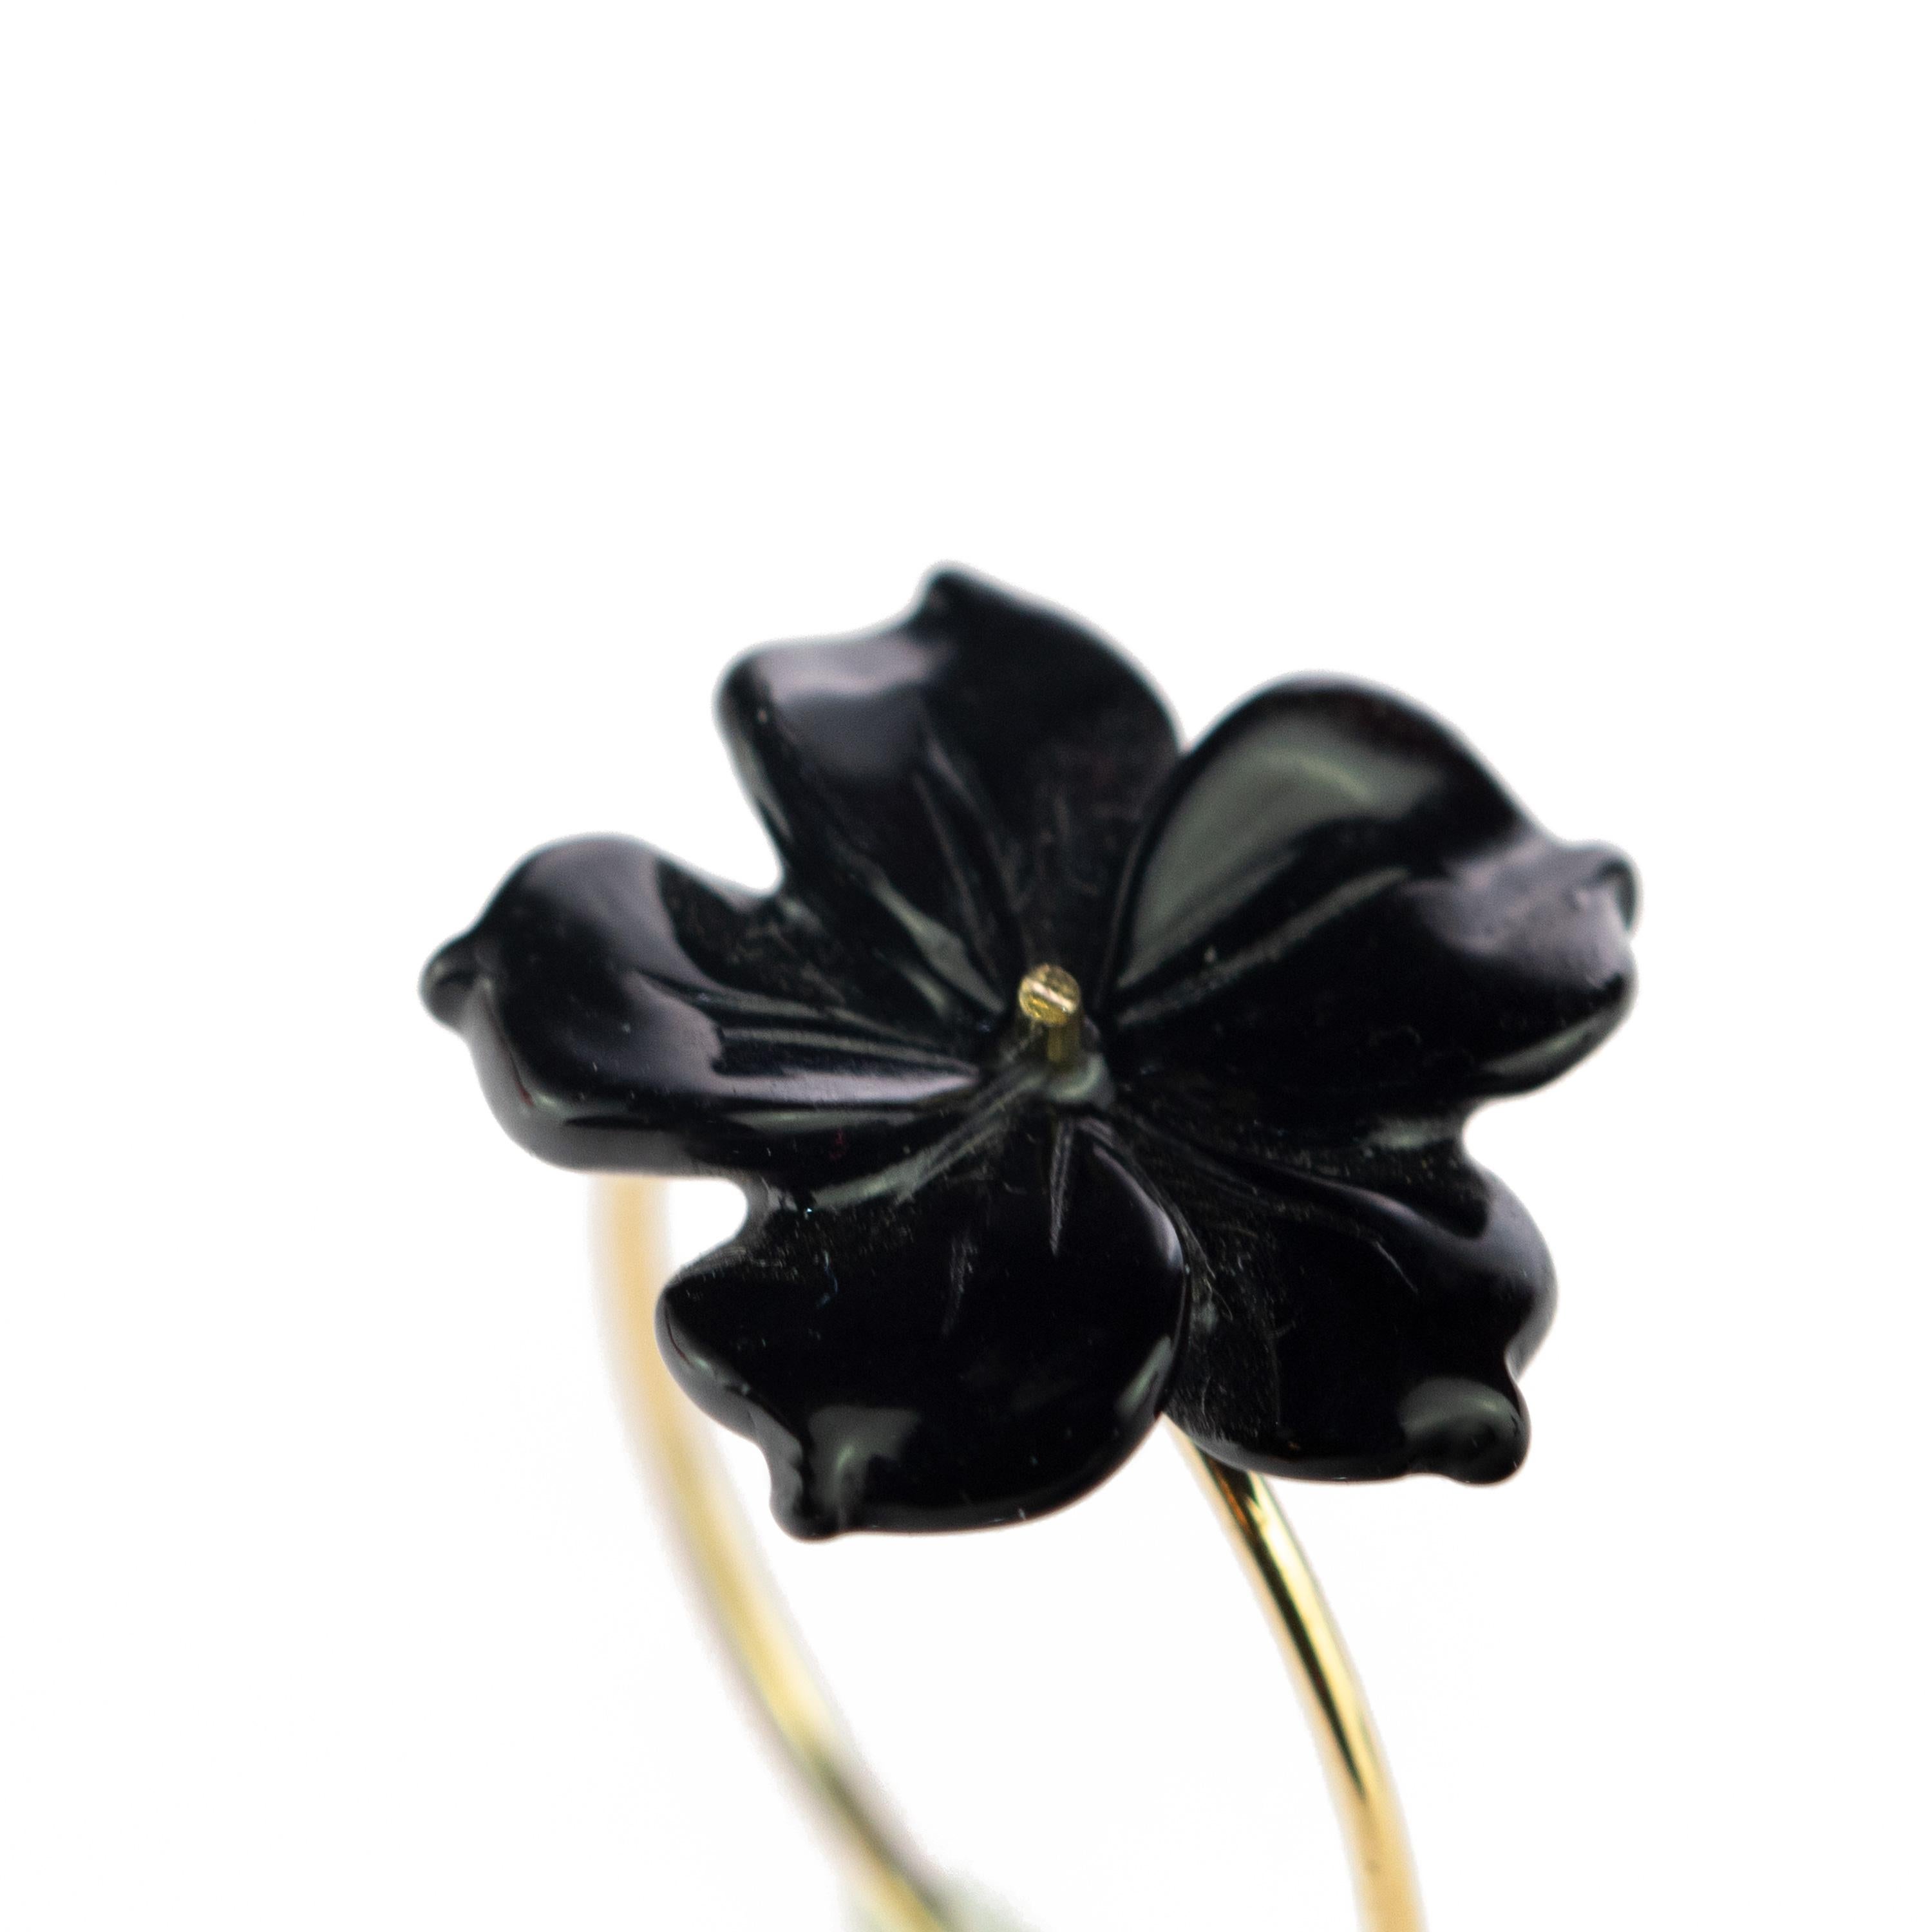 Astonishing and delicate 3.5 carat black agate flower ring. Carved petals that evoke the italian handmade traditional jewelry work, wrapping itself in a soft look enriched with 9 karat yellow gold manifesting glamour and exquisite taste. Cocktail